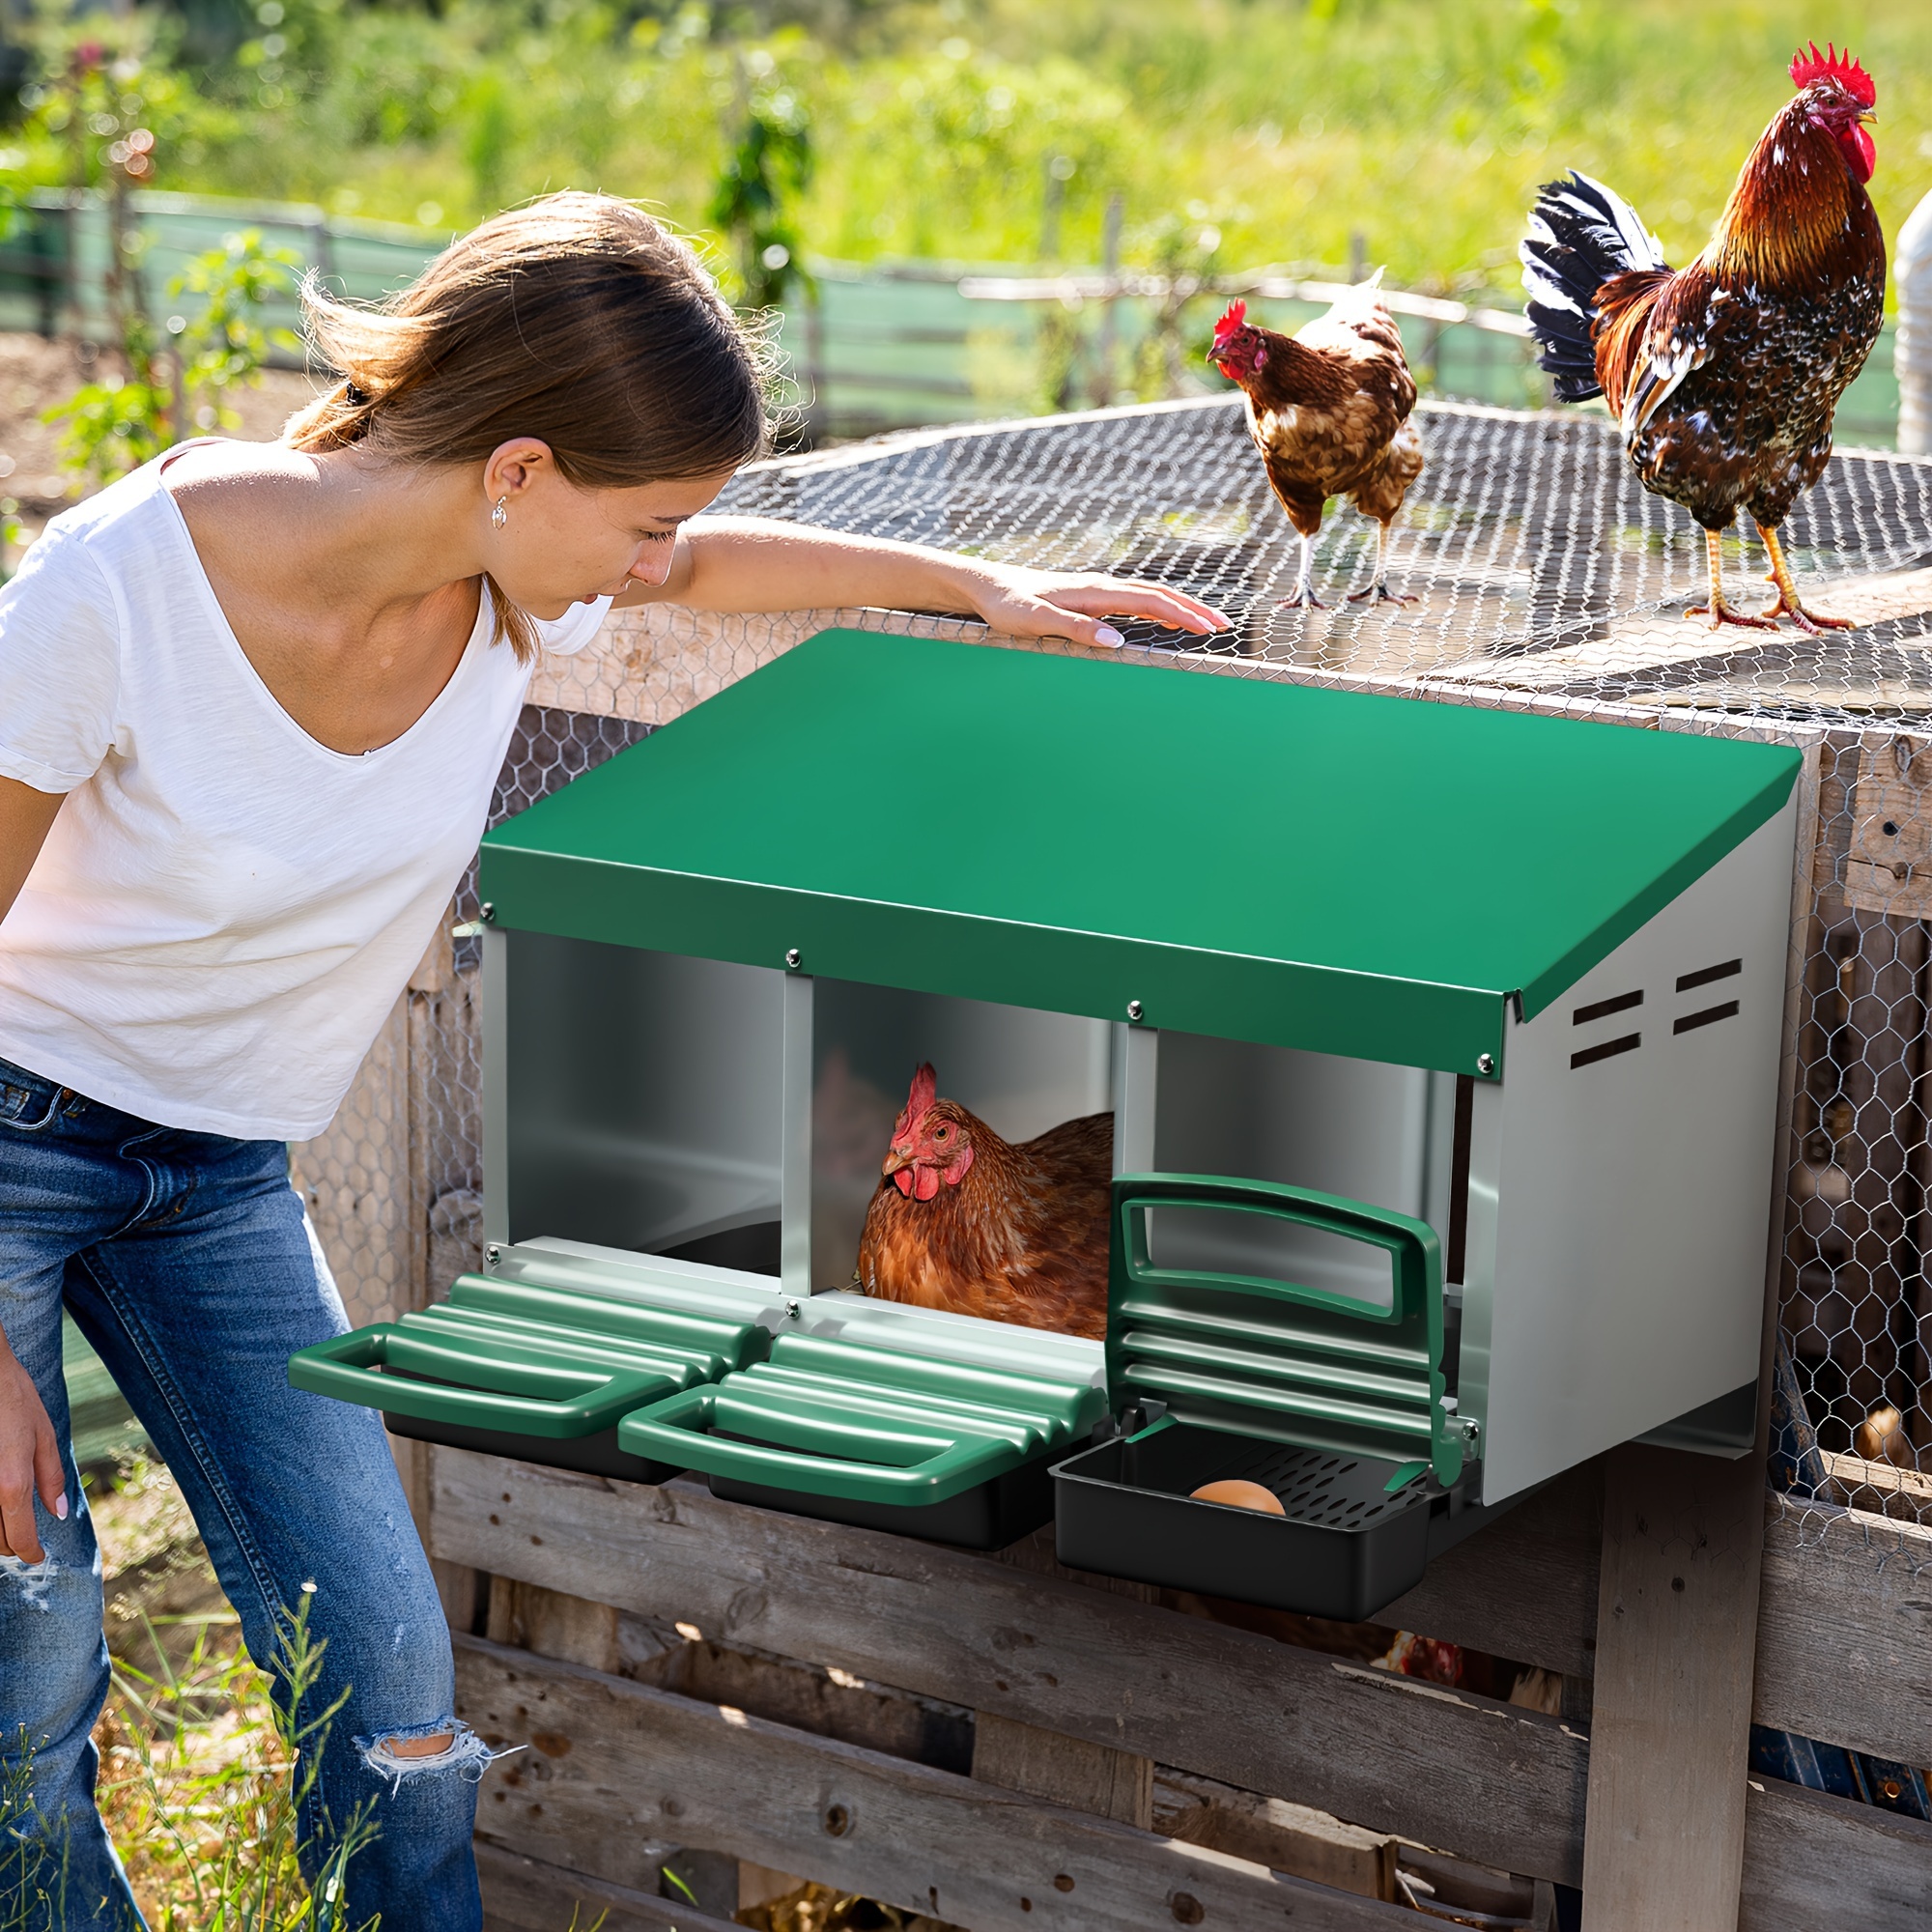 

Genimo 3 Compartment Roll Out Nesting Box For Chickens | For Up To 15 Hens | Heavy Duty Chicken Coop Nesting Box With Lid Cover To Protect Eggs